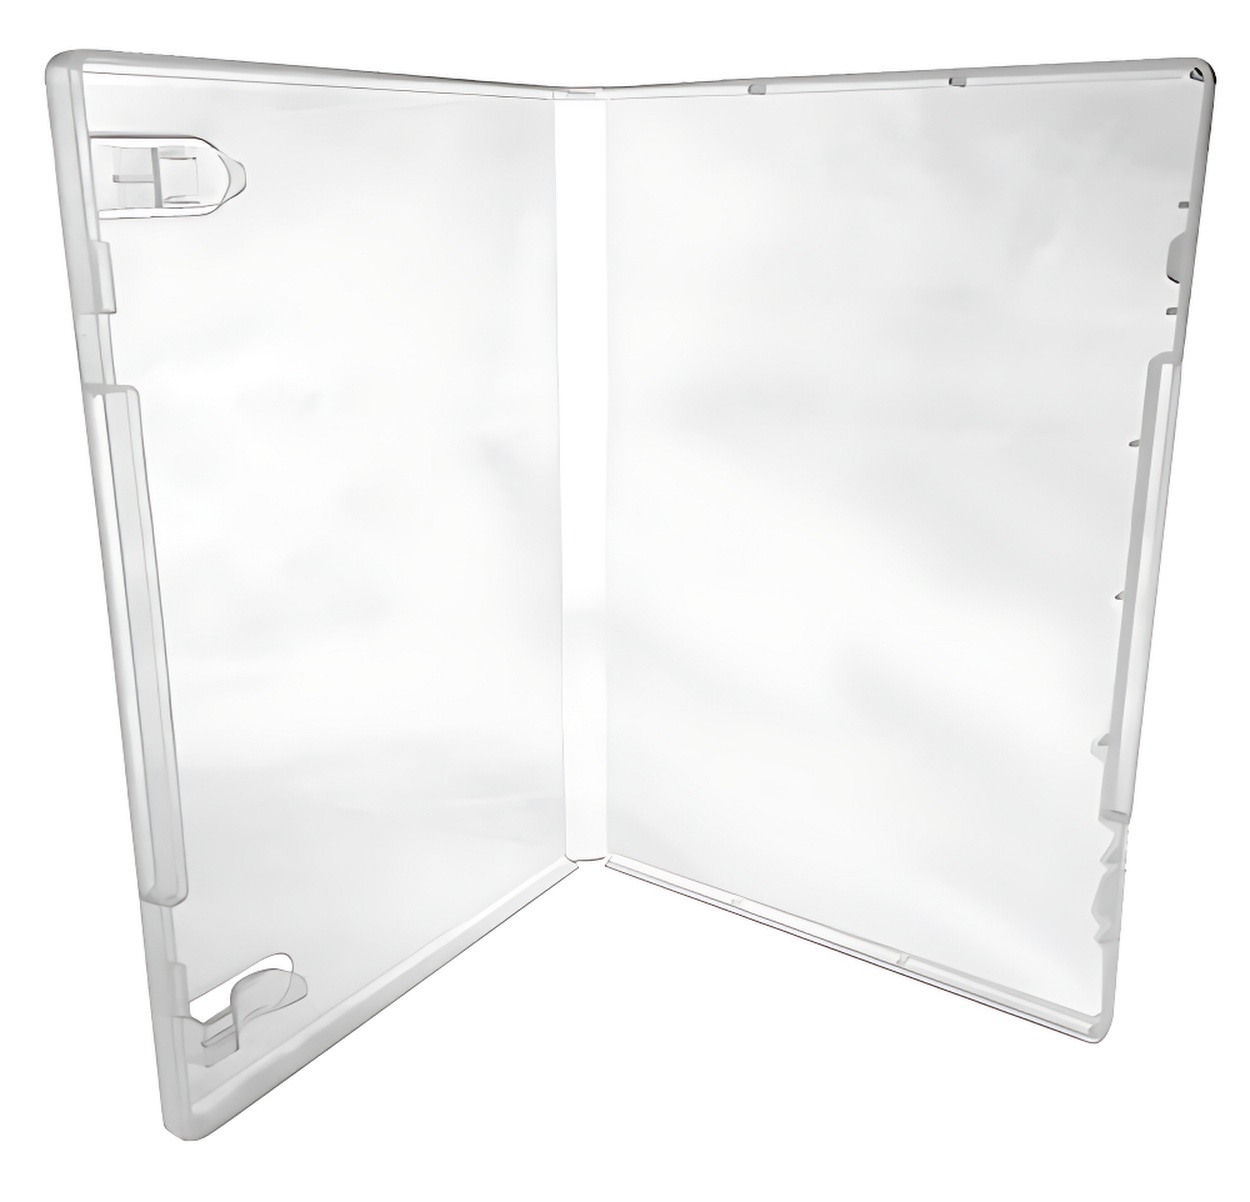 CheckOutStore 1,000 Clear Storage Cases 14mm for Rubber Stamps (No Hub)